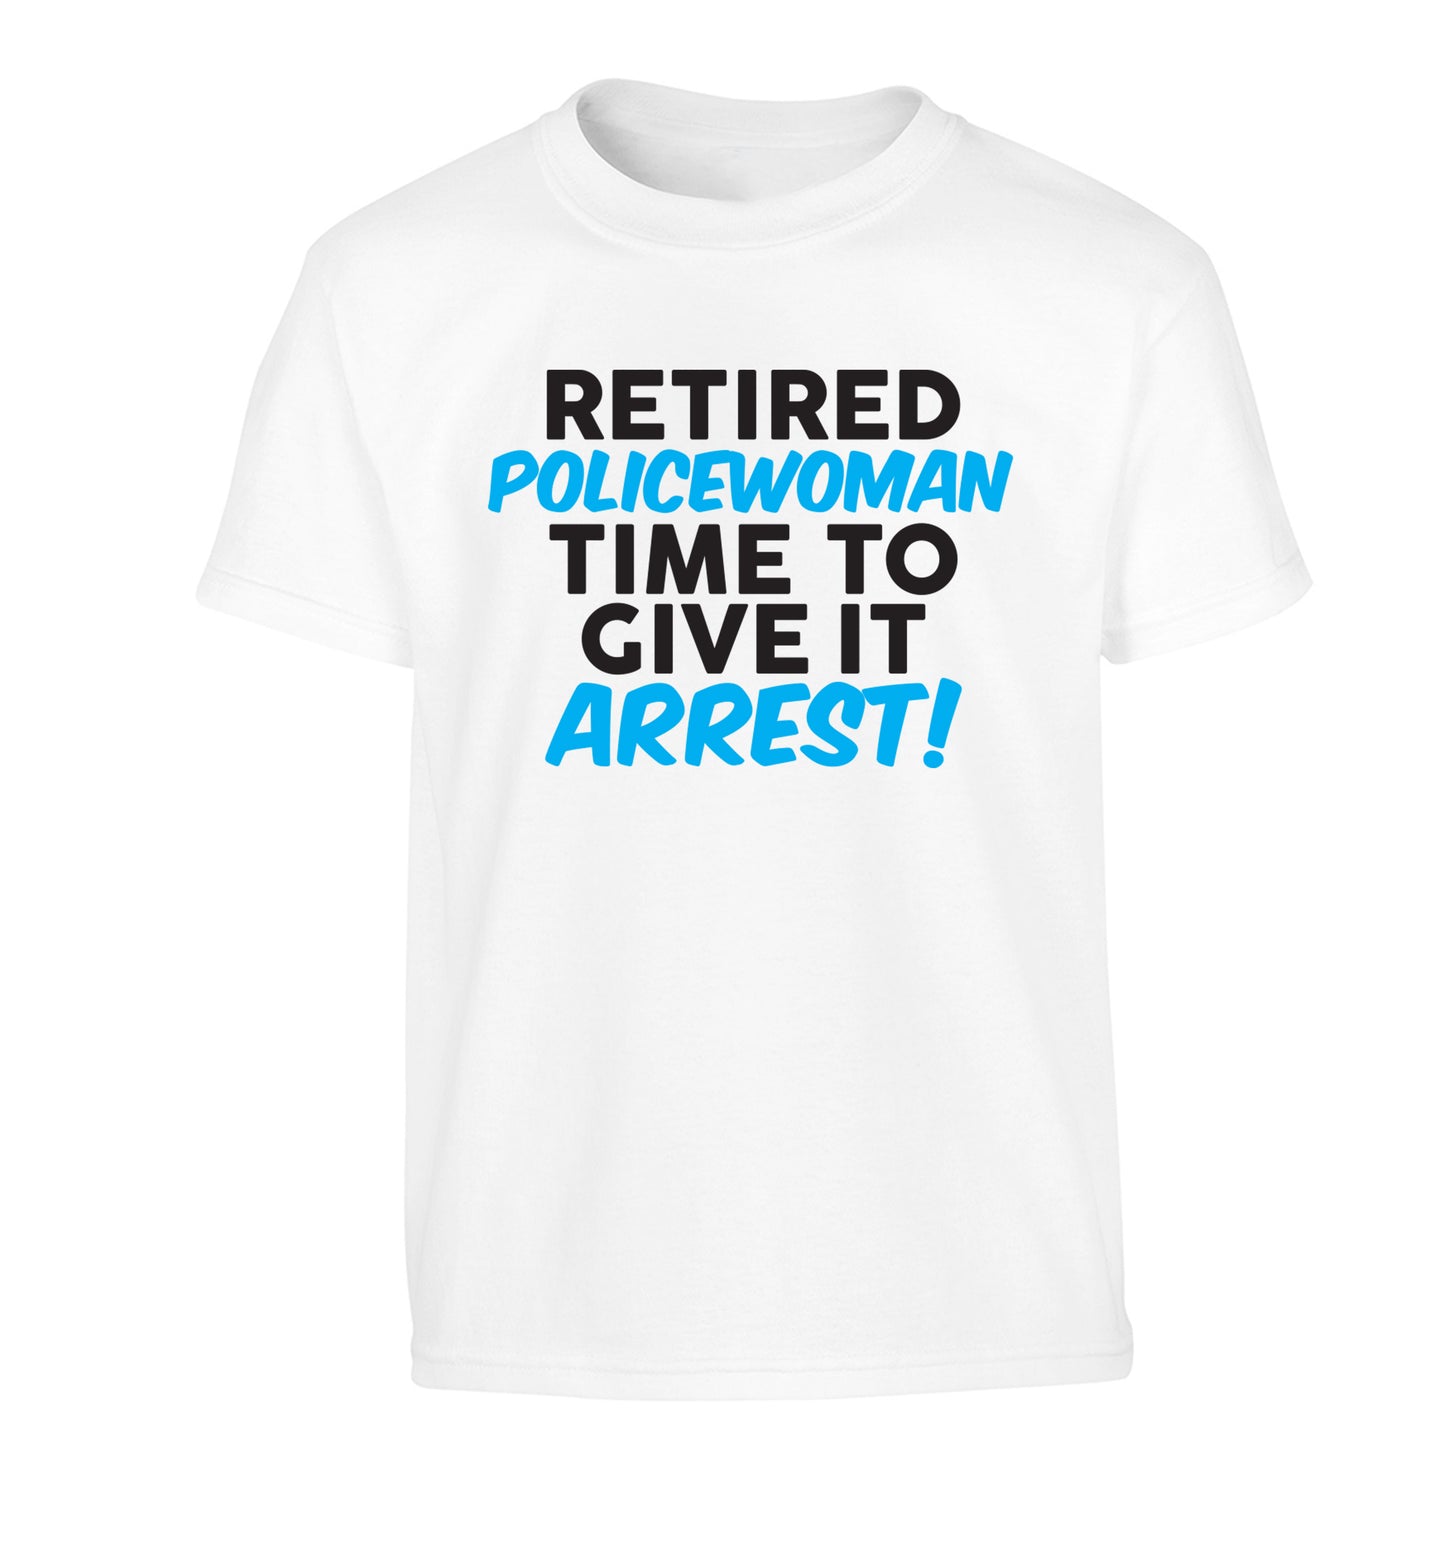 Retired policewoman time to give it arrest Children's white Tshirt 12-13 Years